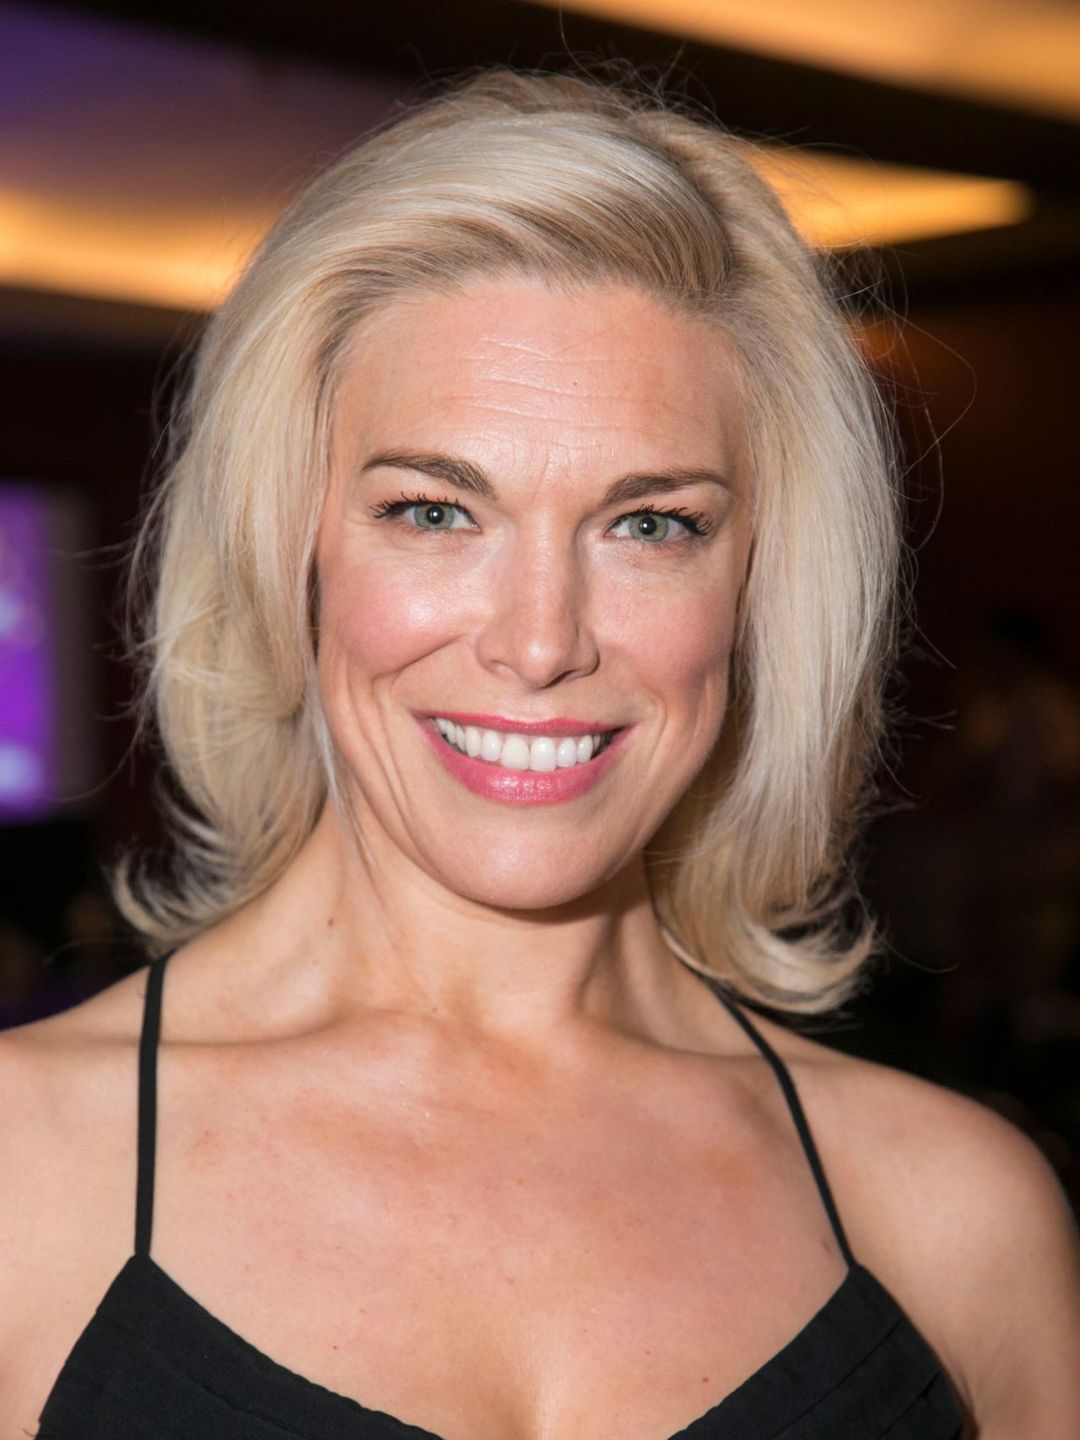 Hannah Waddingham who is her mother